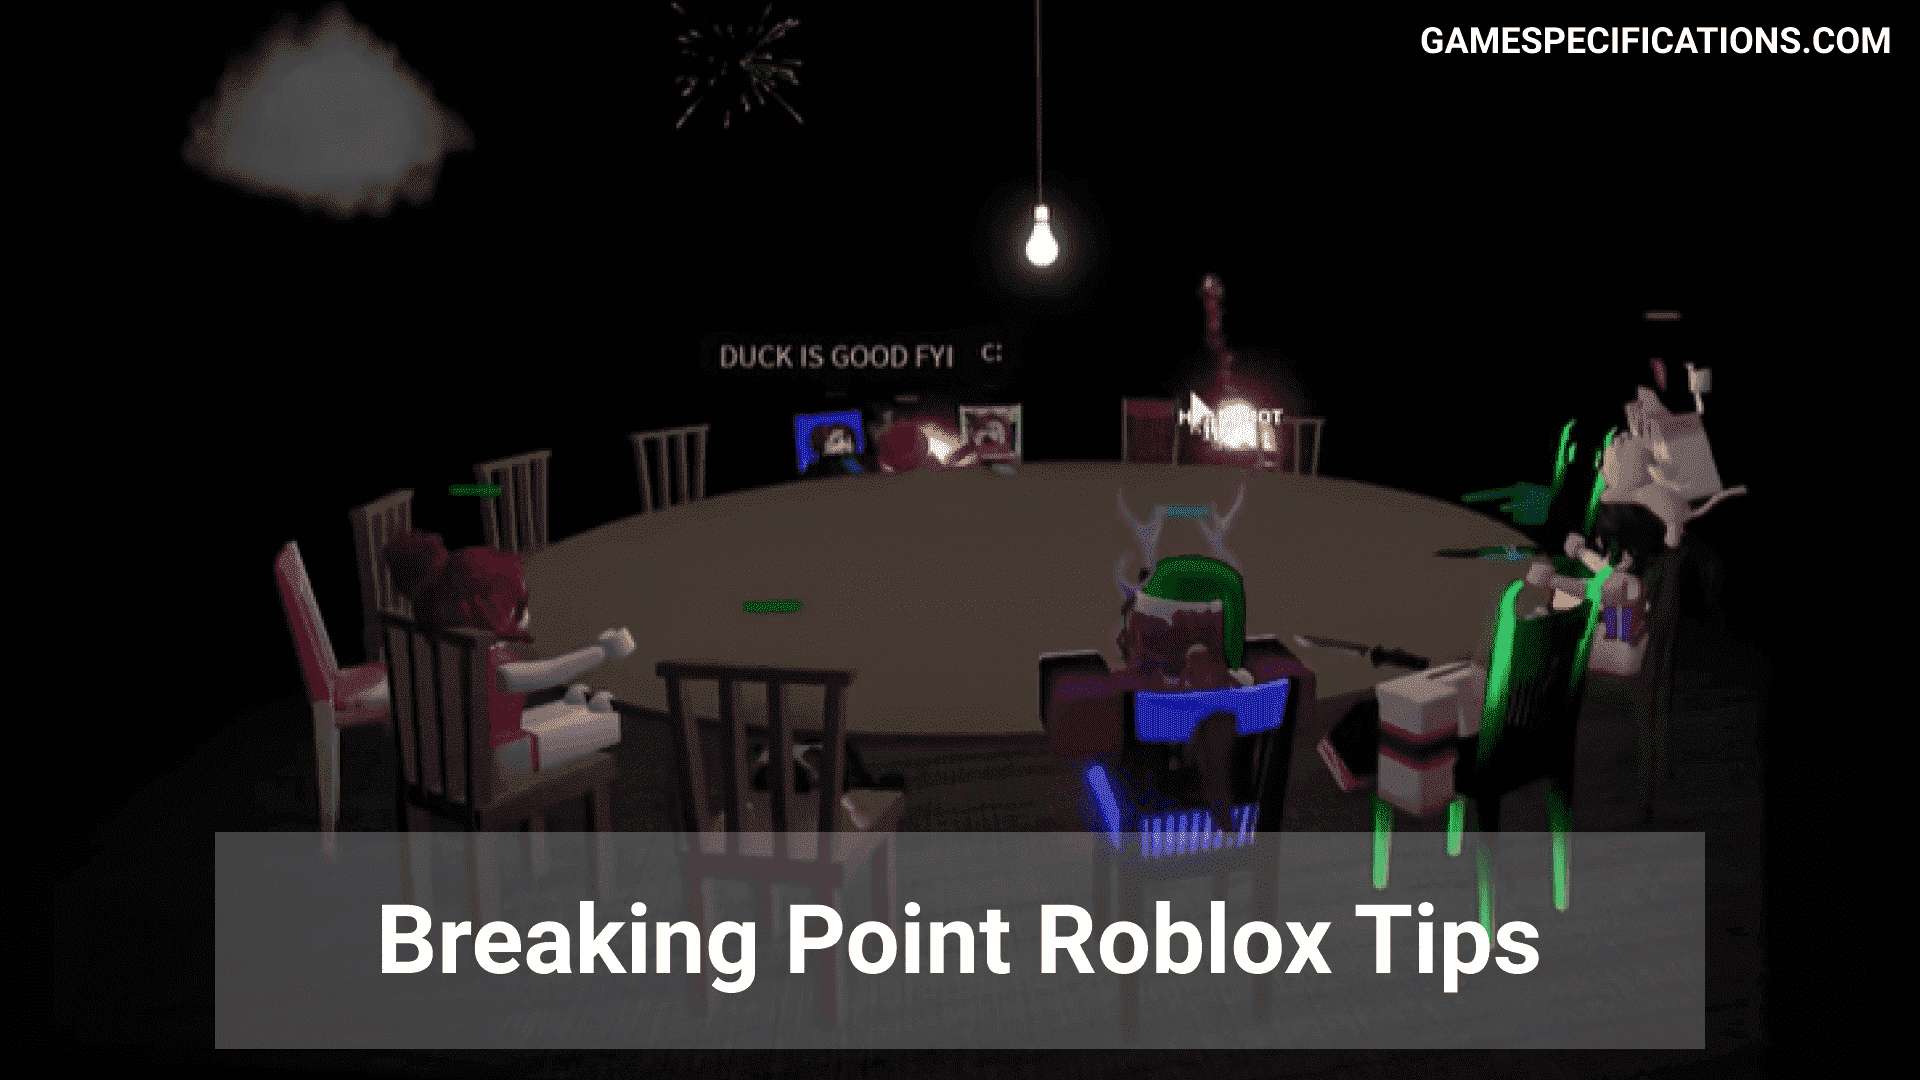 Breaking Point Roblox Guide 11 Tips And Tricks To Secure A Victory Game Specifications - breaking point roblox place